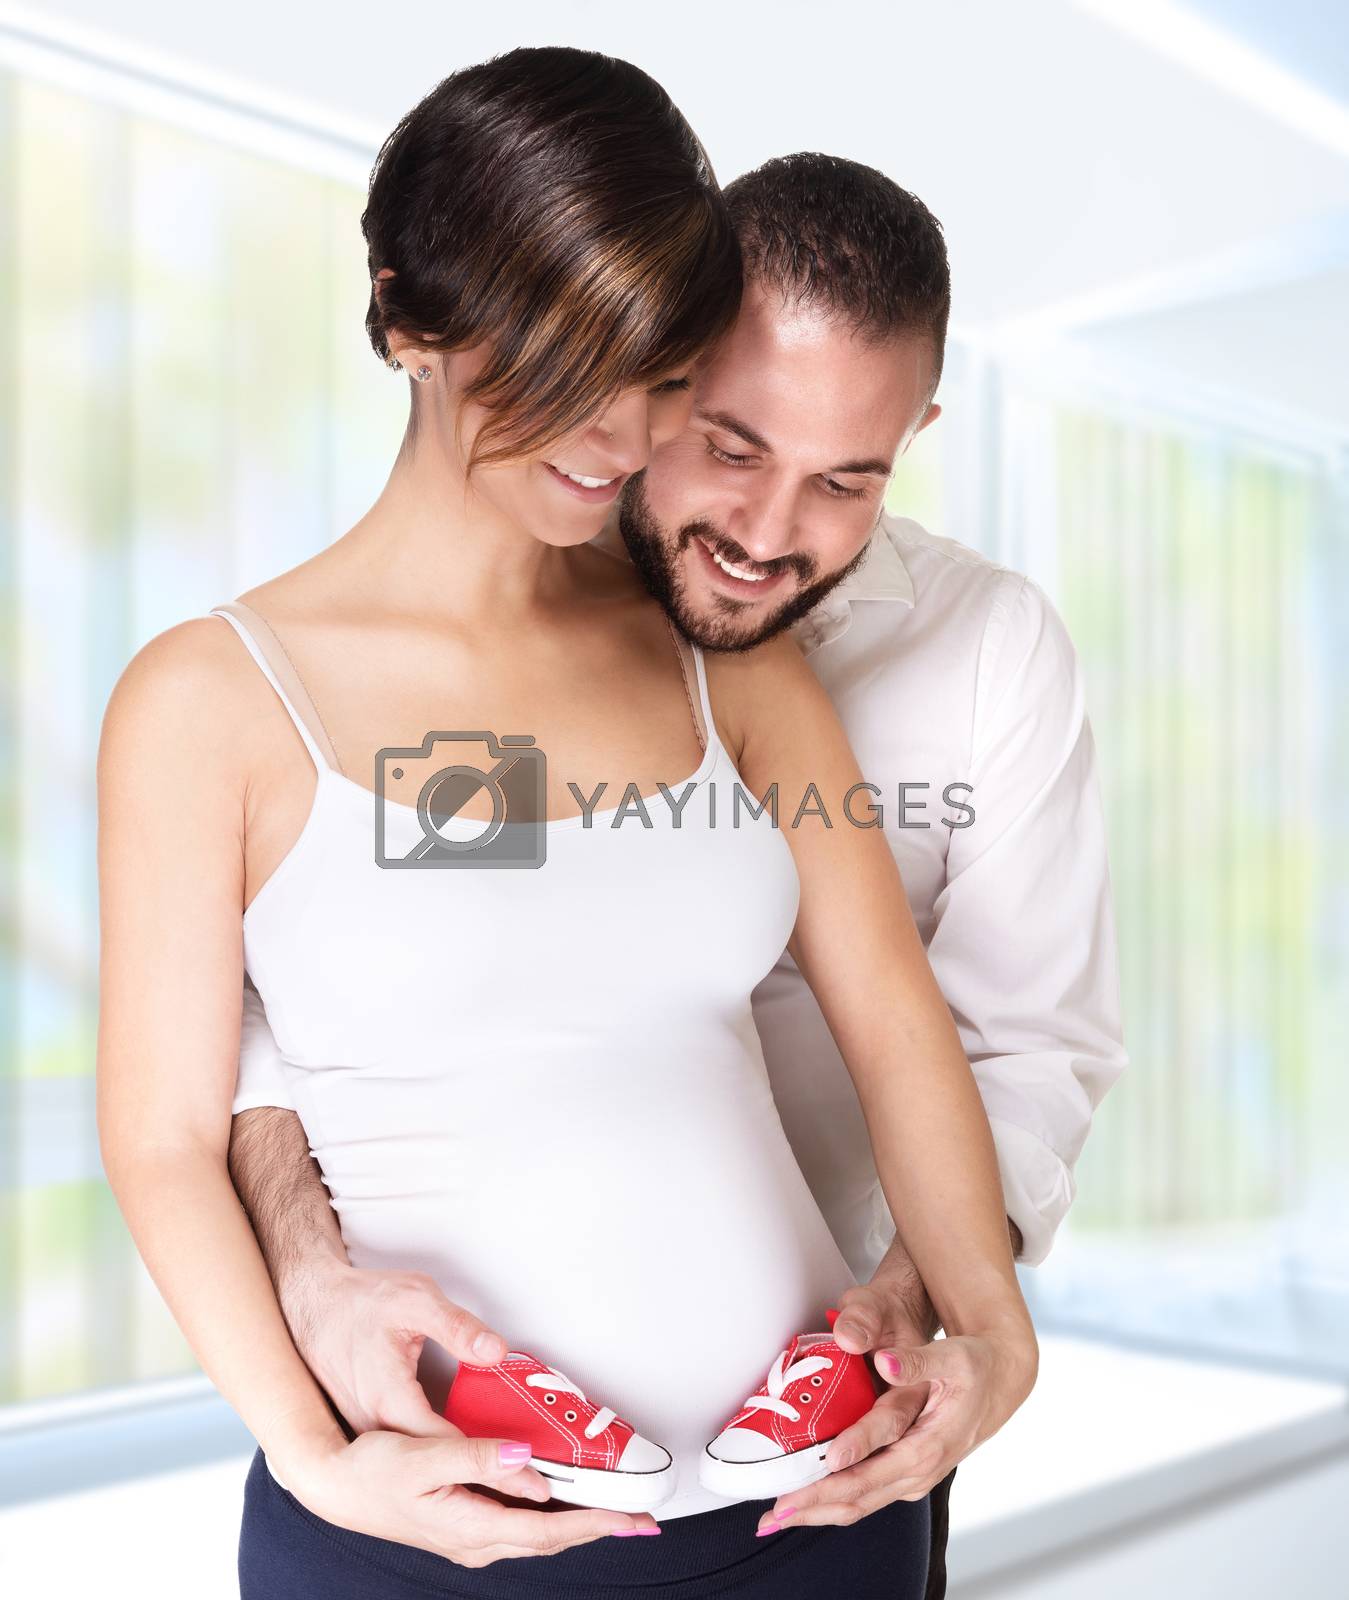 Royalty free image of Happy couple awaiting baby by Anna_Omelchenko